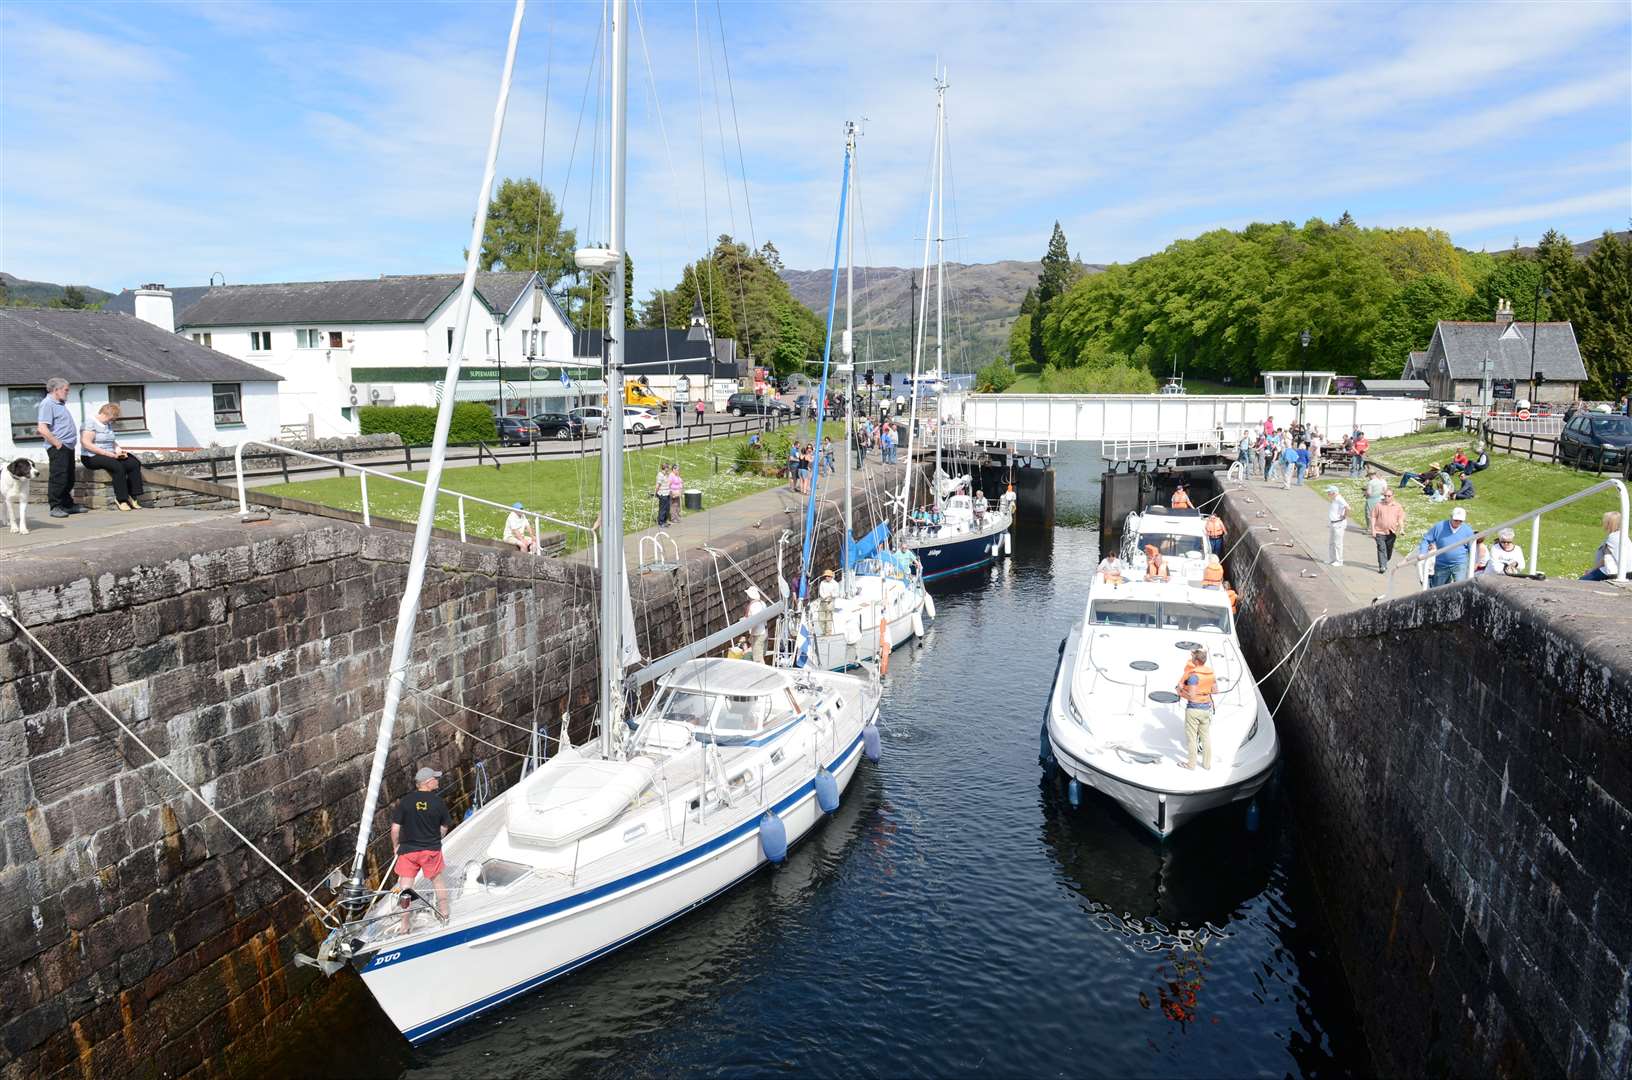 Thomas Telford's Caledonian Canal which opened in 1822. Picture: Alison White